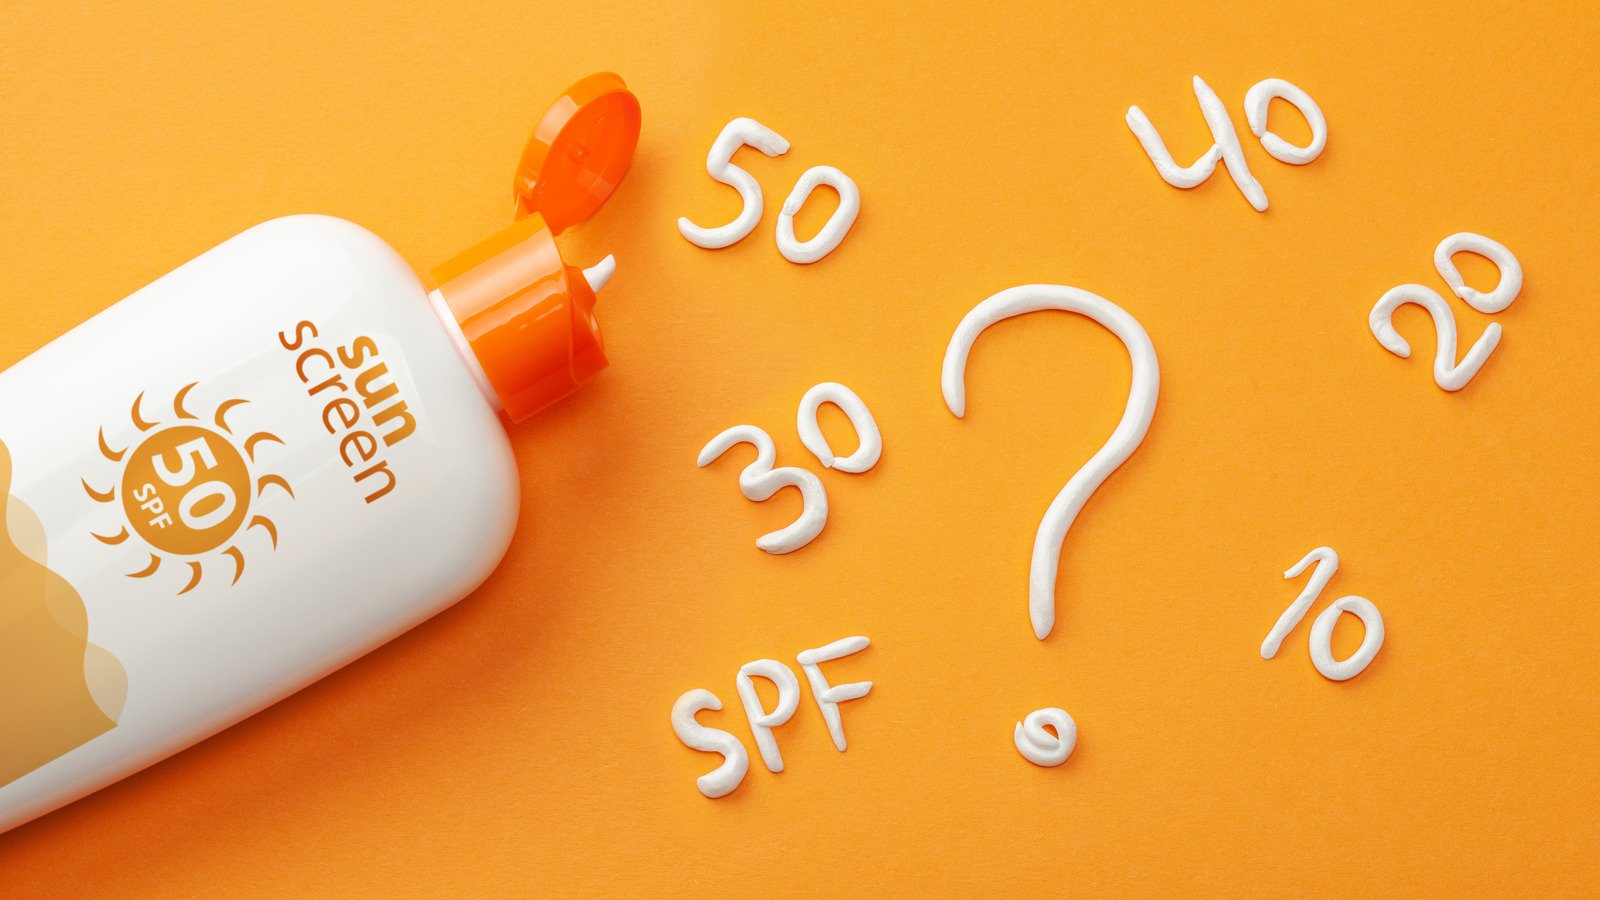 Ingredients You Don't Want To See In Your Sunscreen